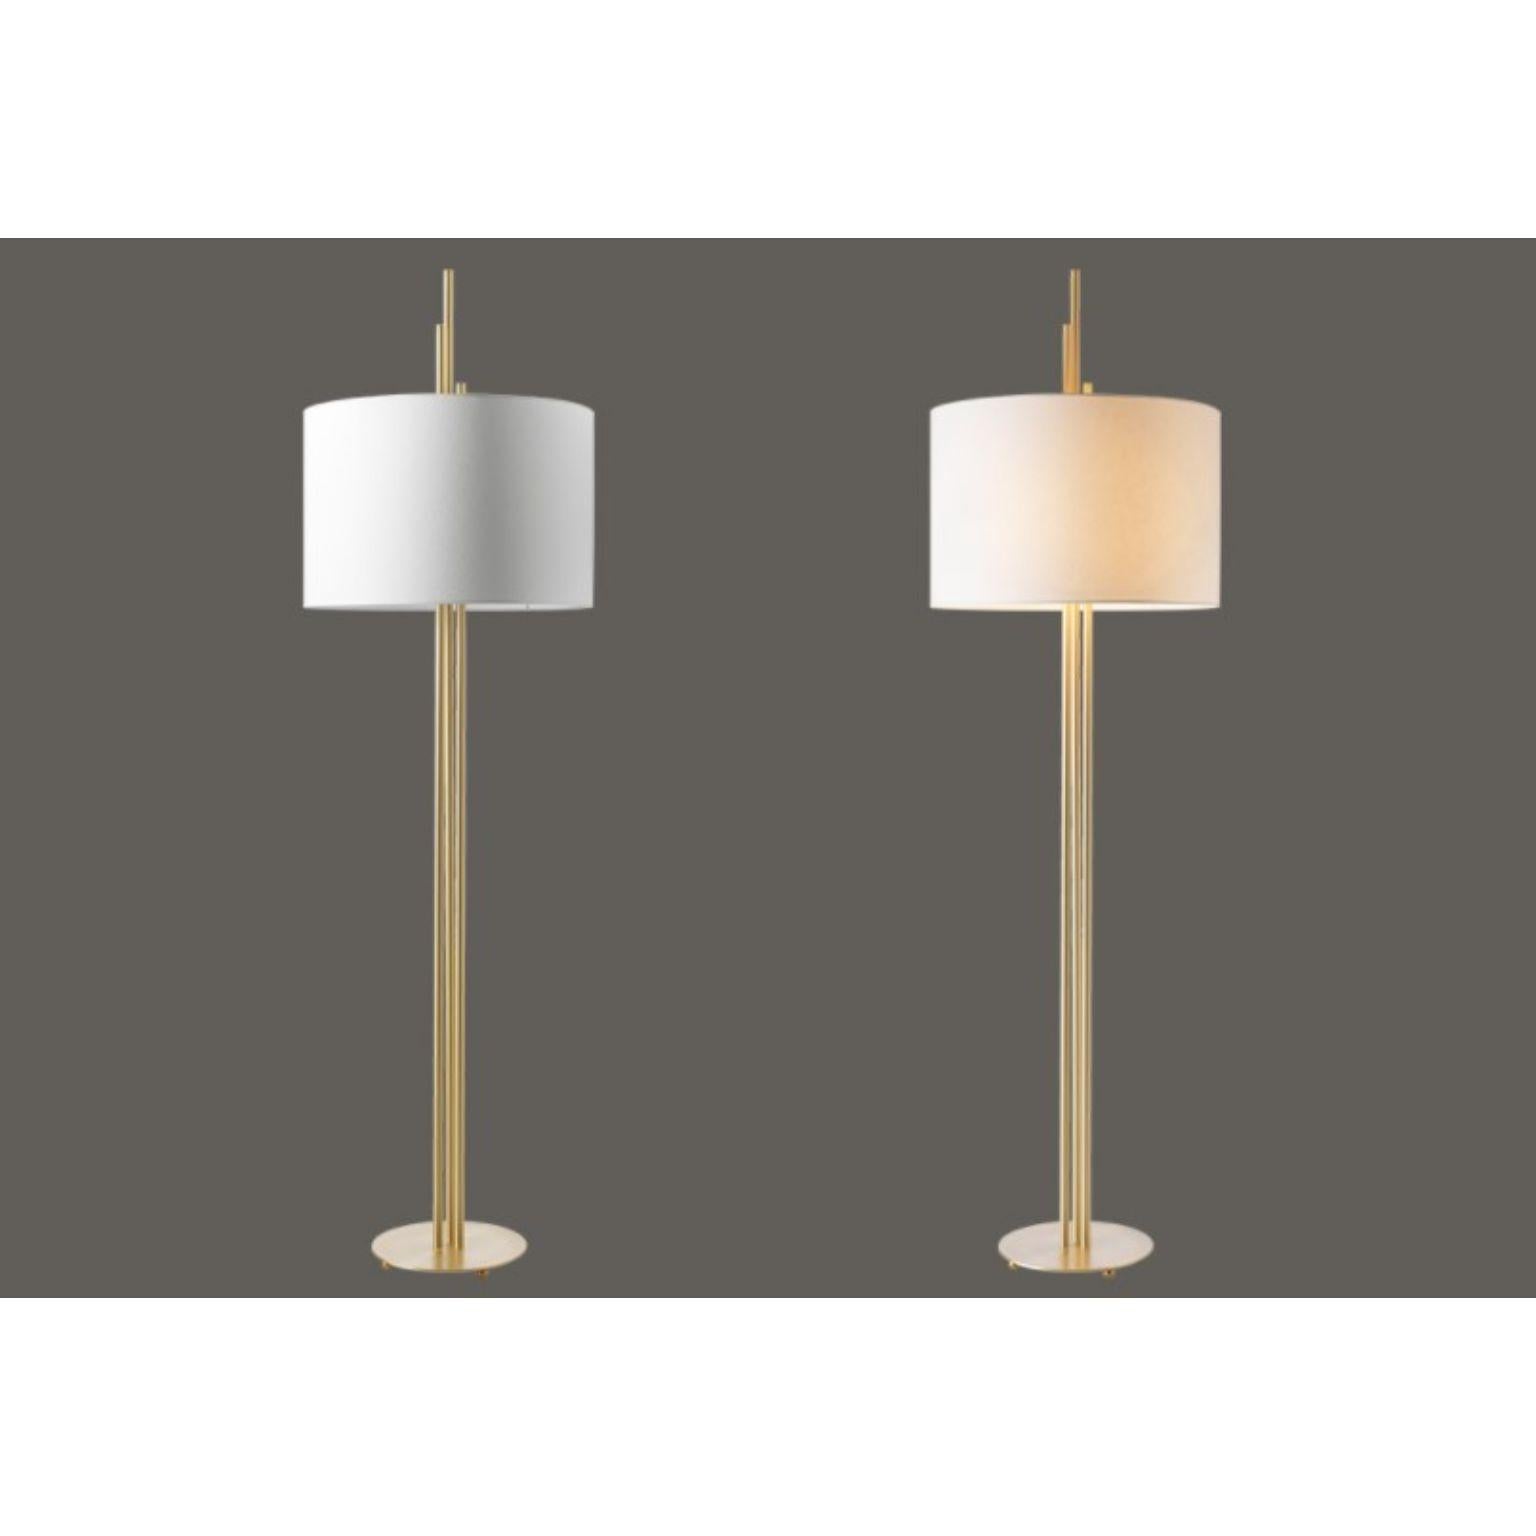 Set of 2 Upper floor lamps by Hervé Langlais
Dimensions: D60X H200 cm
Materials: Solid brass,Lampshade Drop Paper® M1, Black textile cable (2m).
Others finishes are available.

All our lamps can be wired according to each country. If sold to